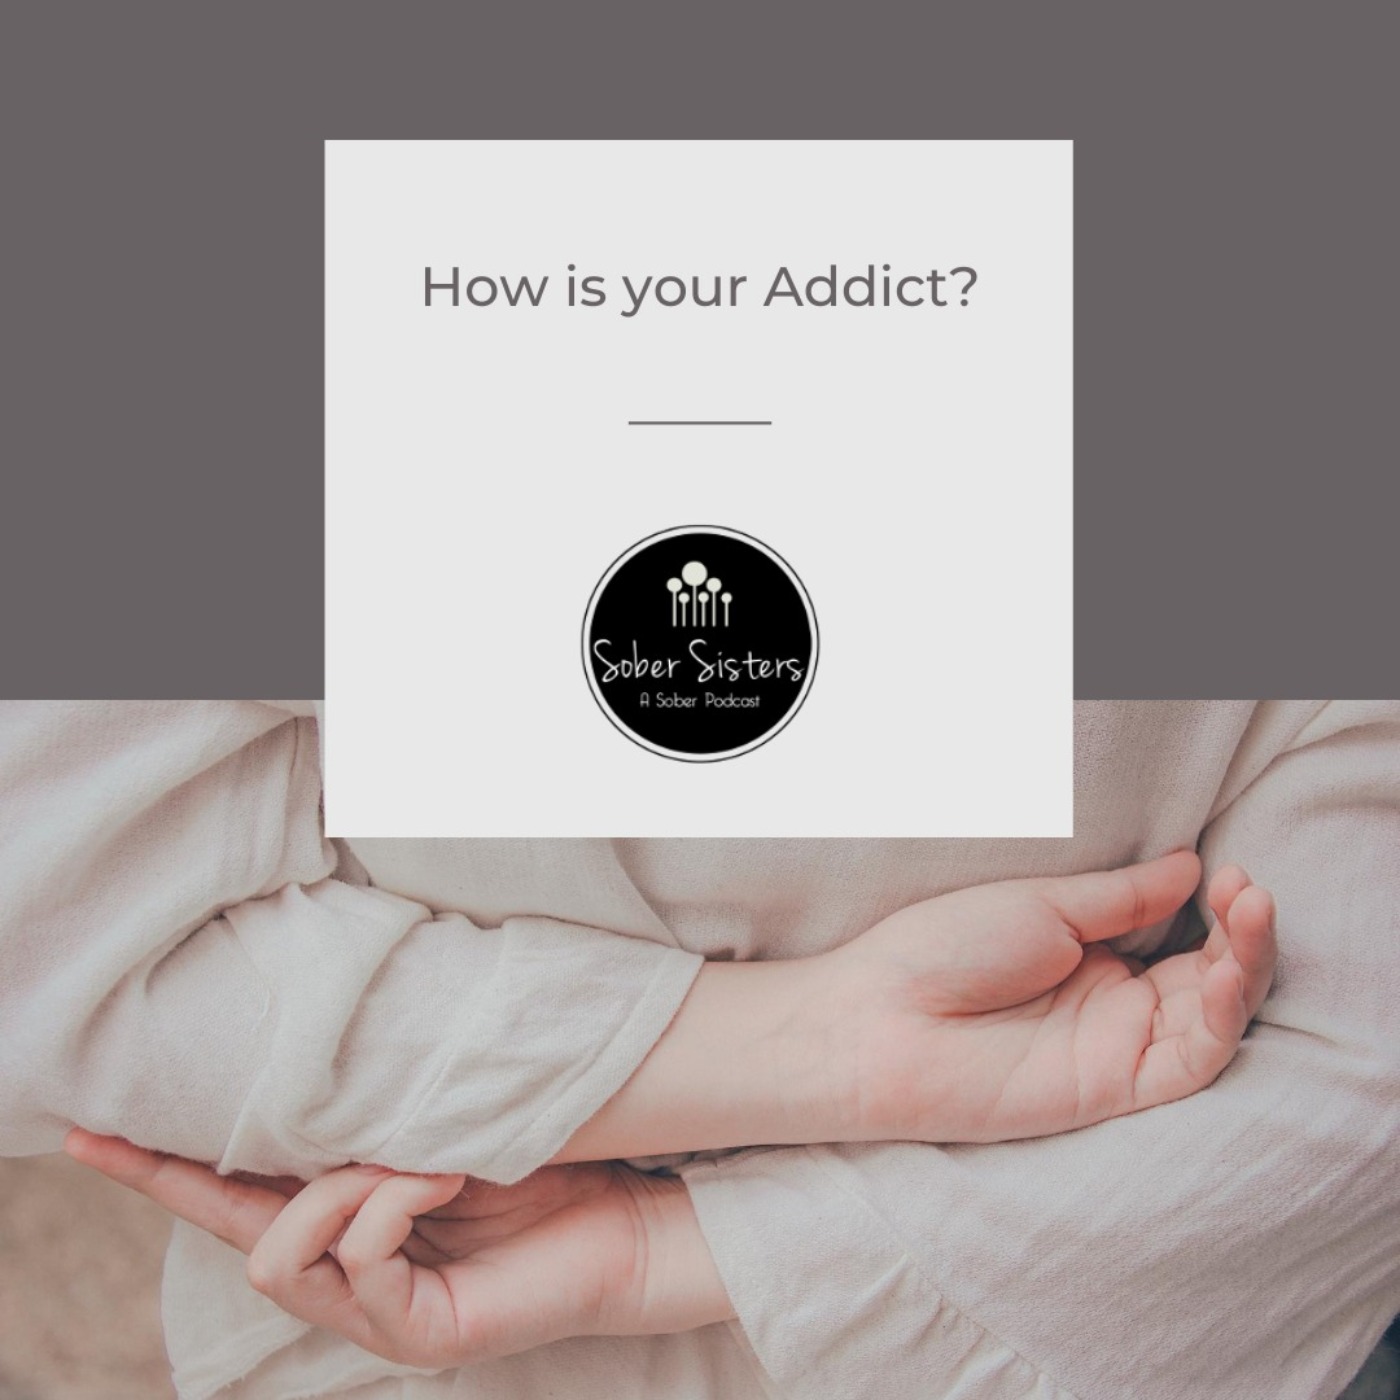 How is Your Addict?